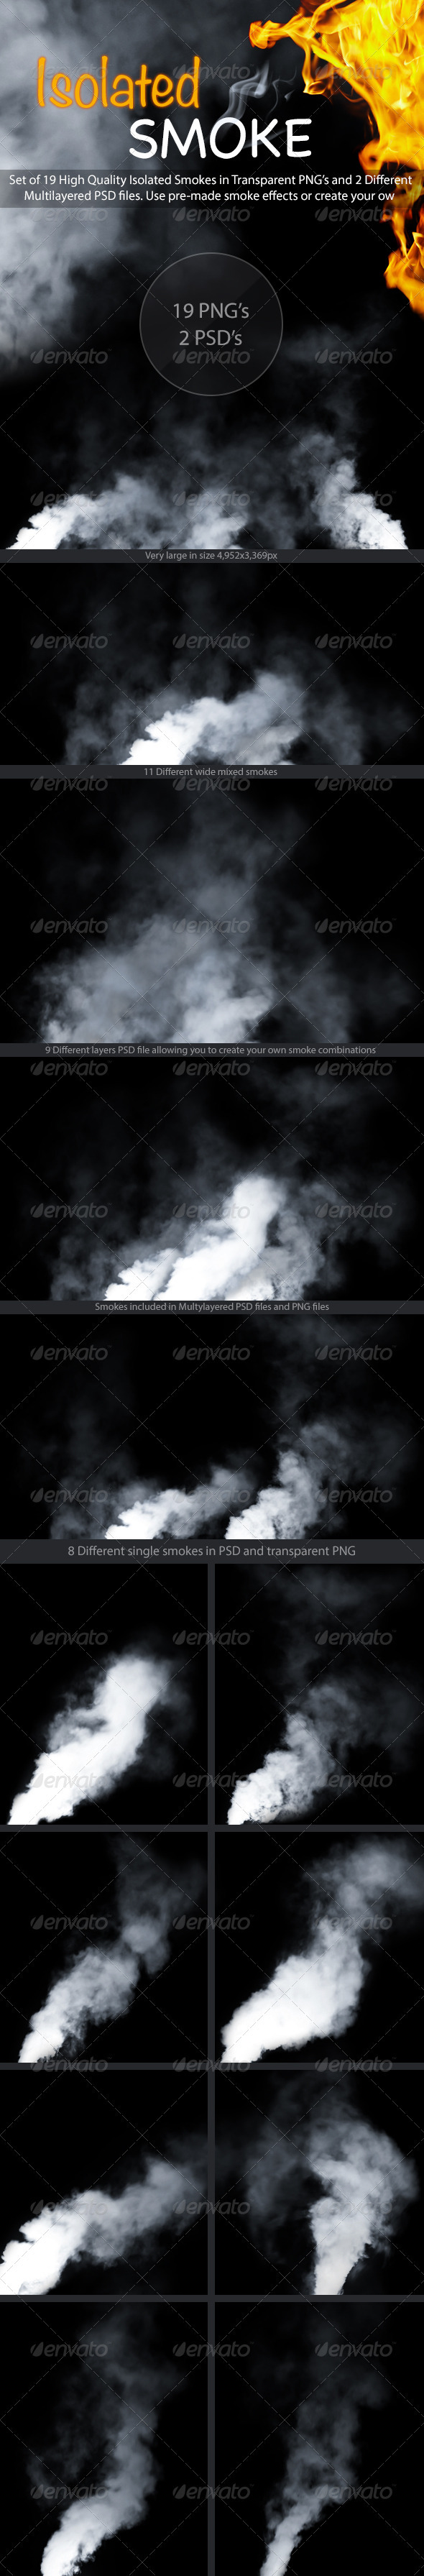 Graphics: Atmosphere Clean Clean Energy Clean Smoke Clouds Effects Fire Fire Smoke Fog High Quality Smoke Industry Isolated Smoke Mist Smoke Smoke Png Smokes Smokey Smoking Smooth Special Steam Steaming Stroke Trail Transparent Transparent Smoke White Smoke